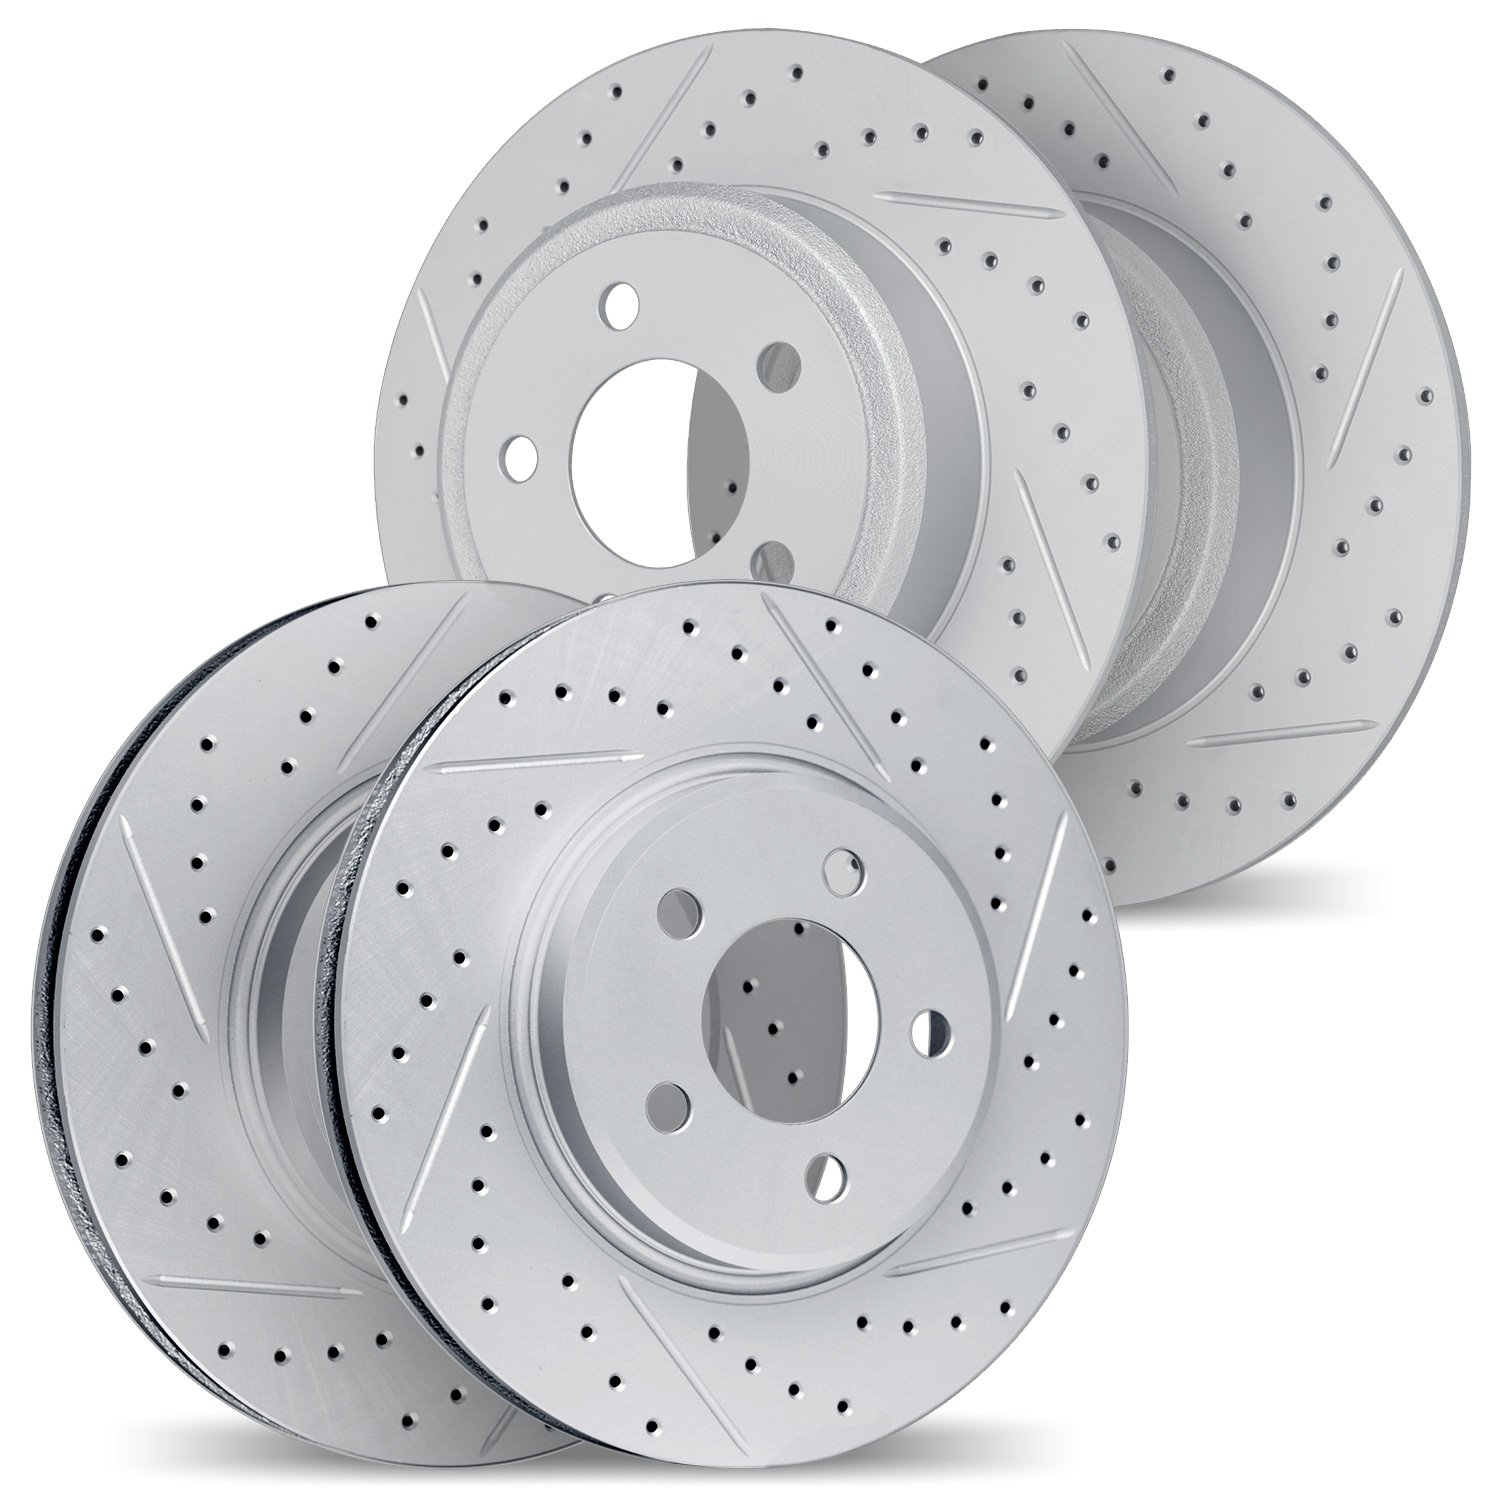 2004-54046 Geoperformance Drilled/Slotted Brake Rotors, 2005-2008 Ford/Lincoln/Mercury/Mazda, Position: Front and Rear